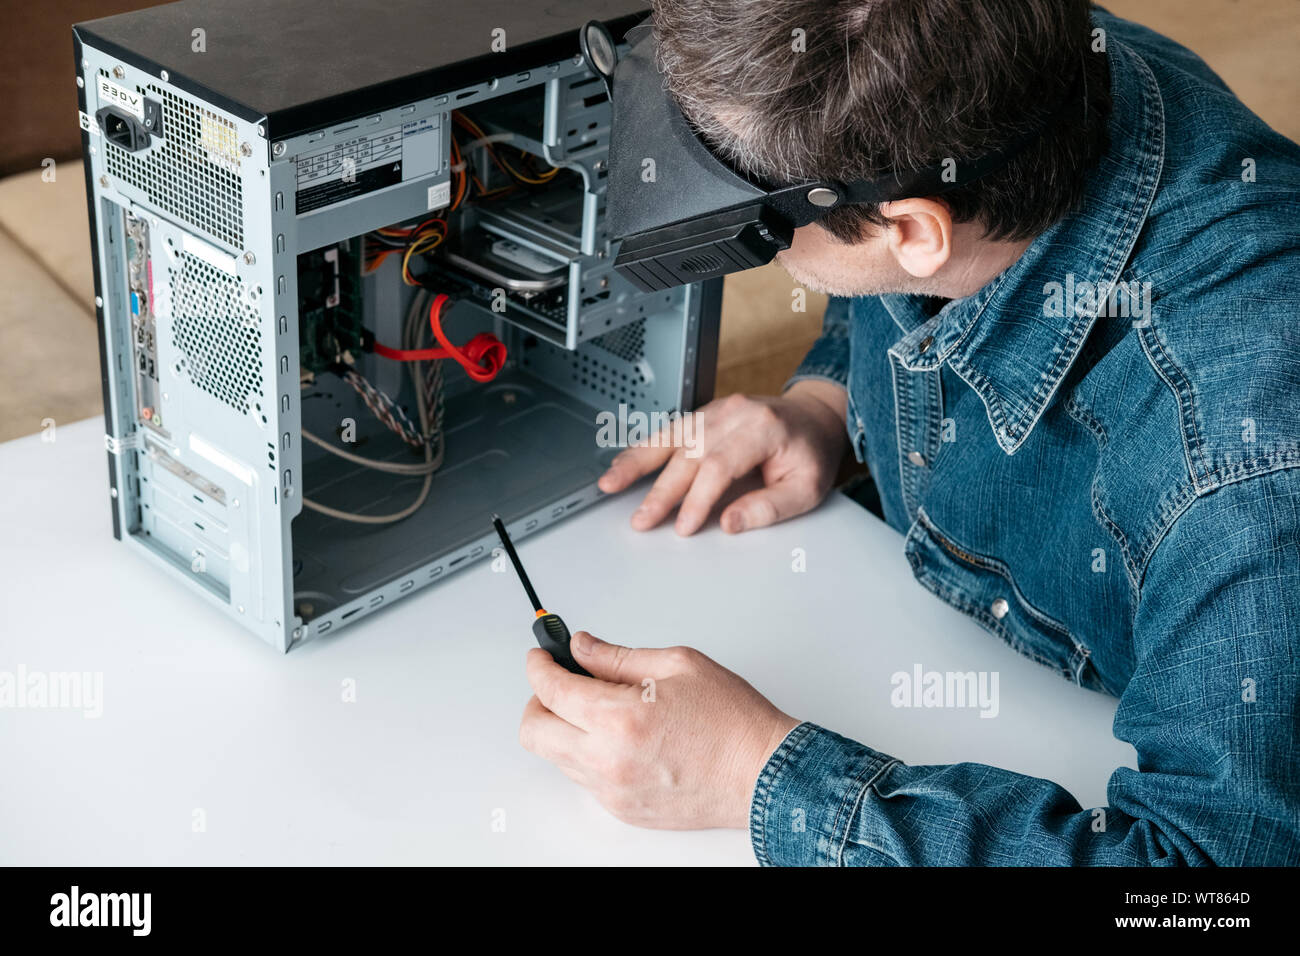 Repairman is disassembling personal computer. Engineer is diagnostic and fixing broken pc in workshop. Electronic repair shop, technology renovation, Stock Photo